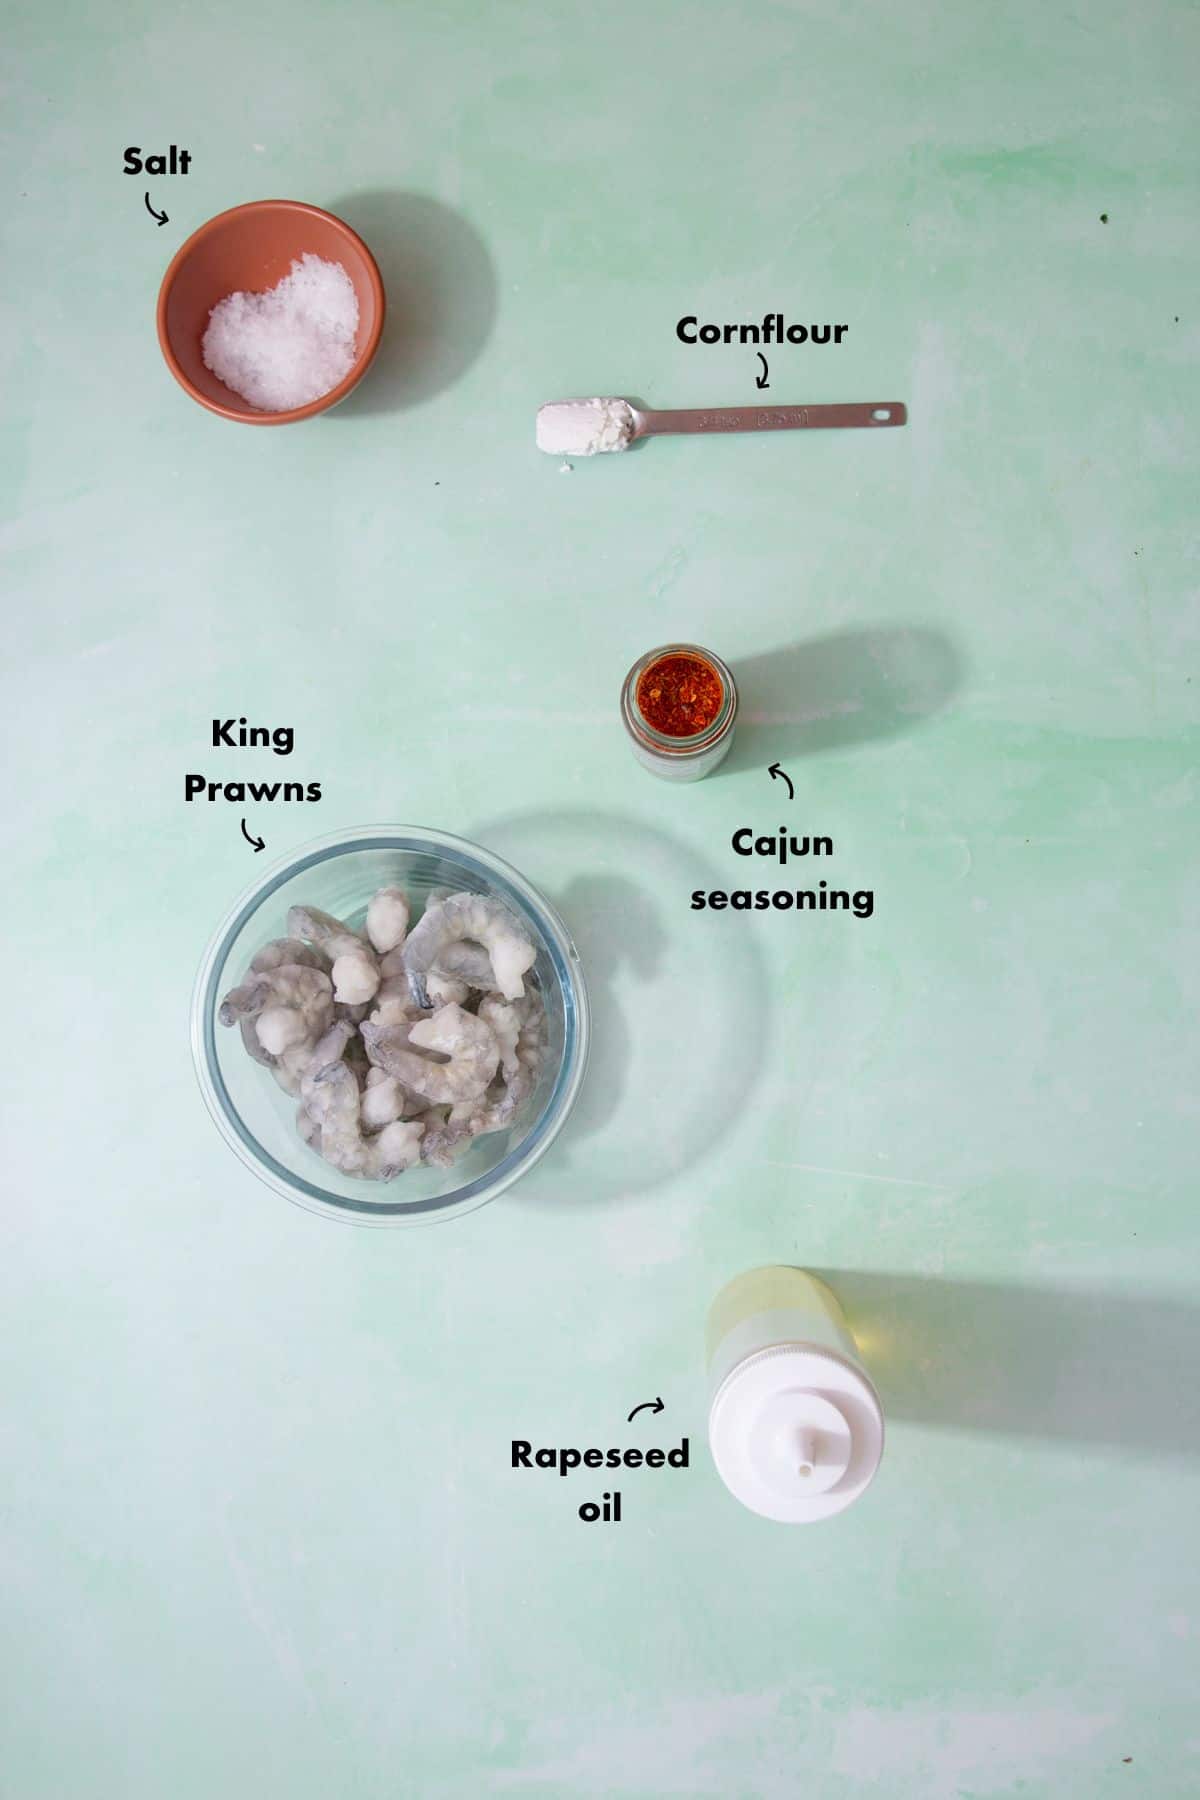 Ingredients to make the king prawn recipe laid out on a pale blue background and labelled.